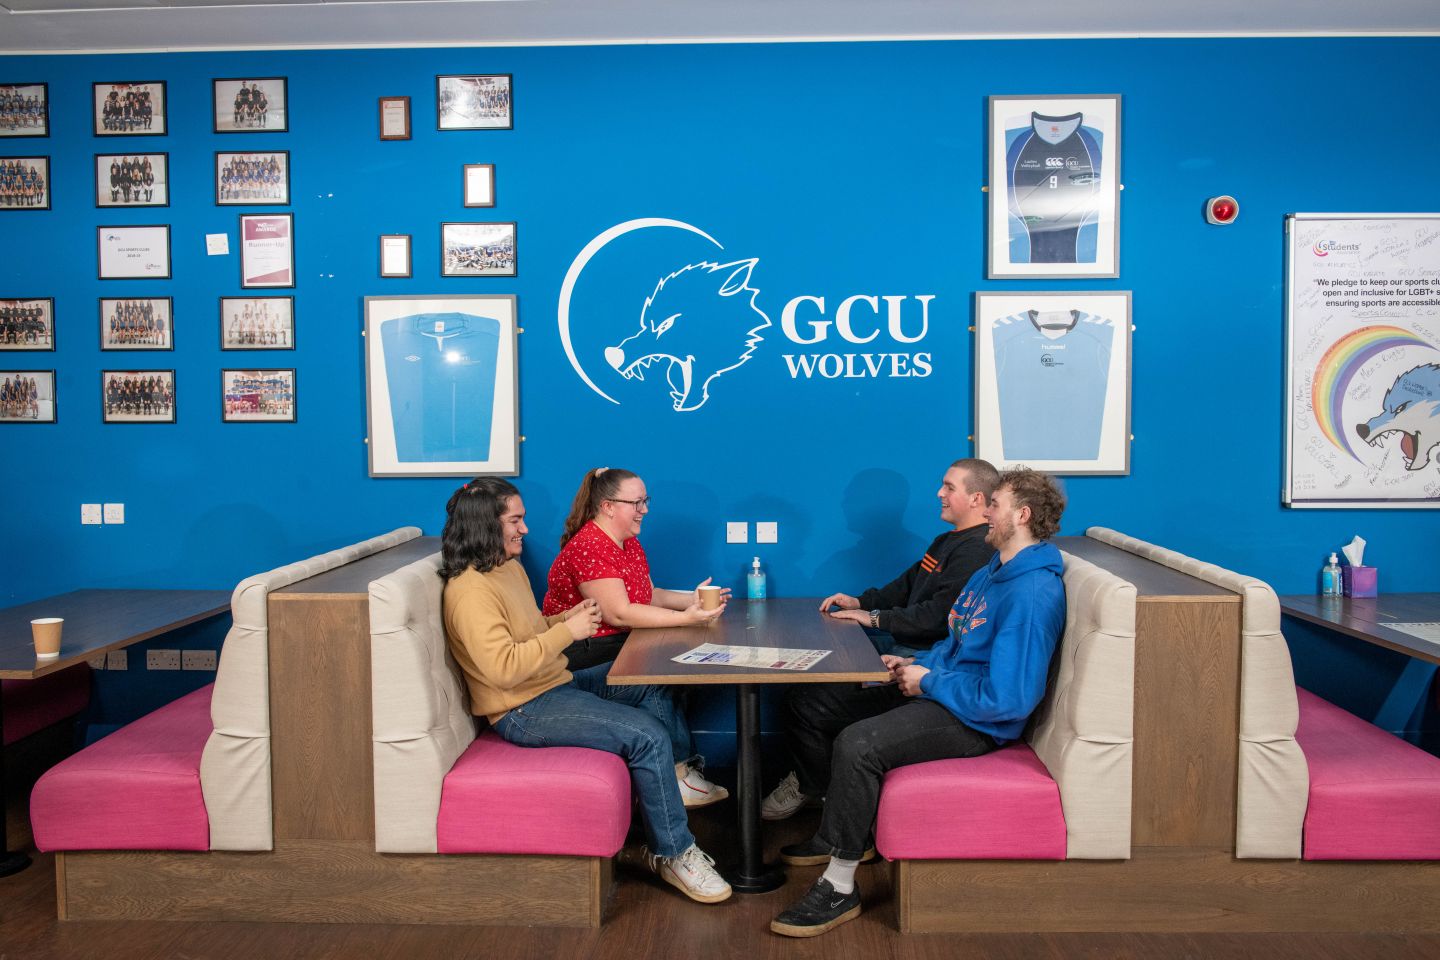 A group of GCU students in the Students' Association on Glasgow campus. 

L-R: Samuel Gonzalez, Amy Moffat, Aidan Rooney and Kieran Will